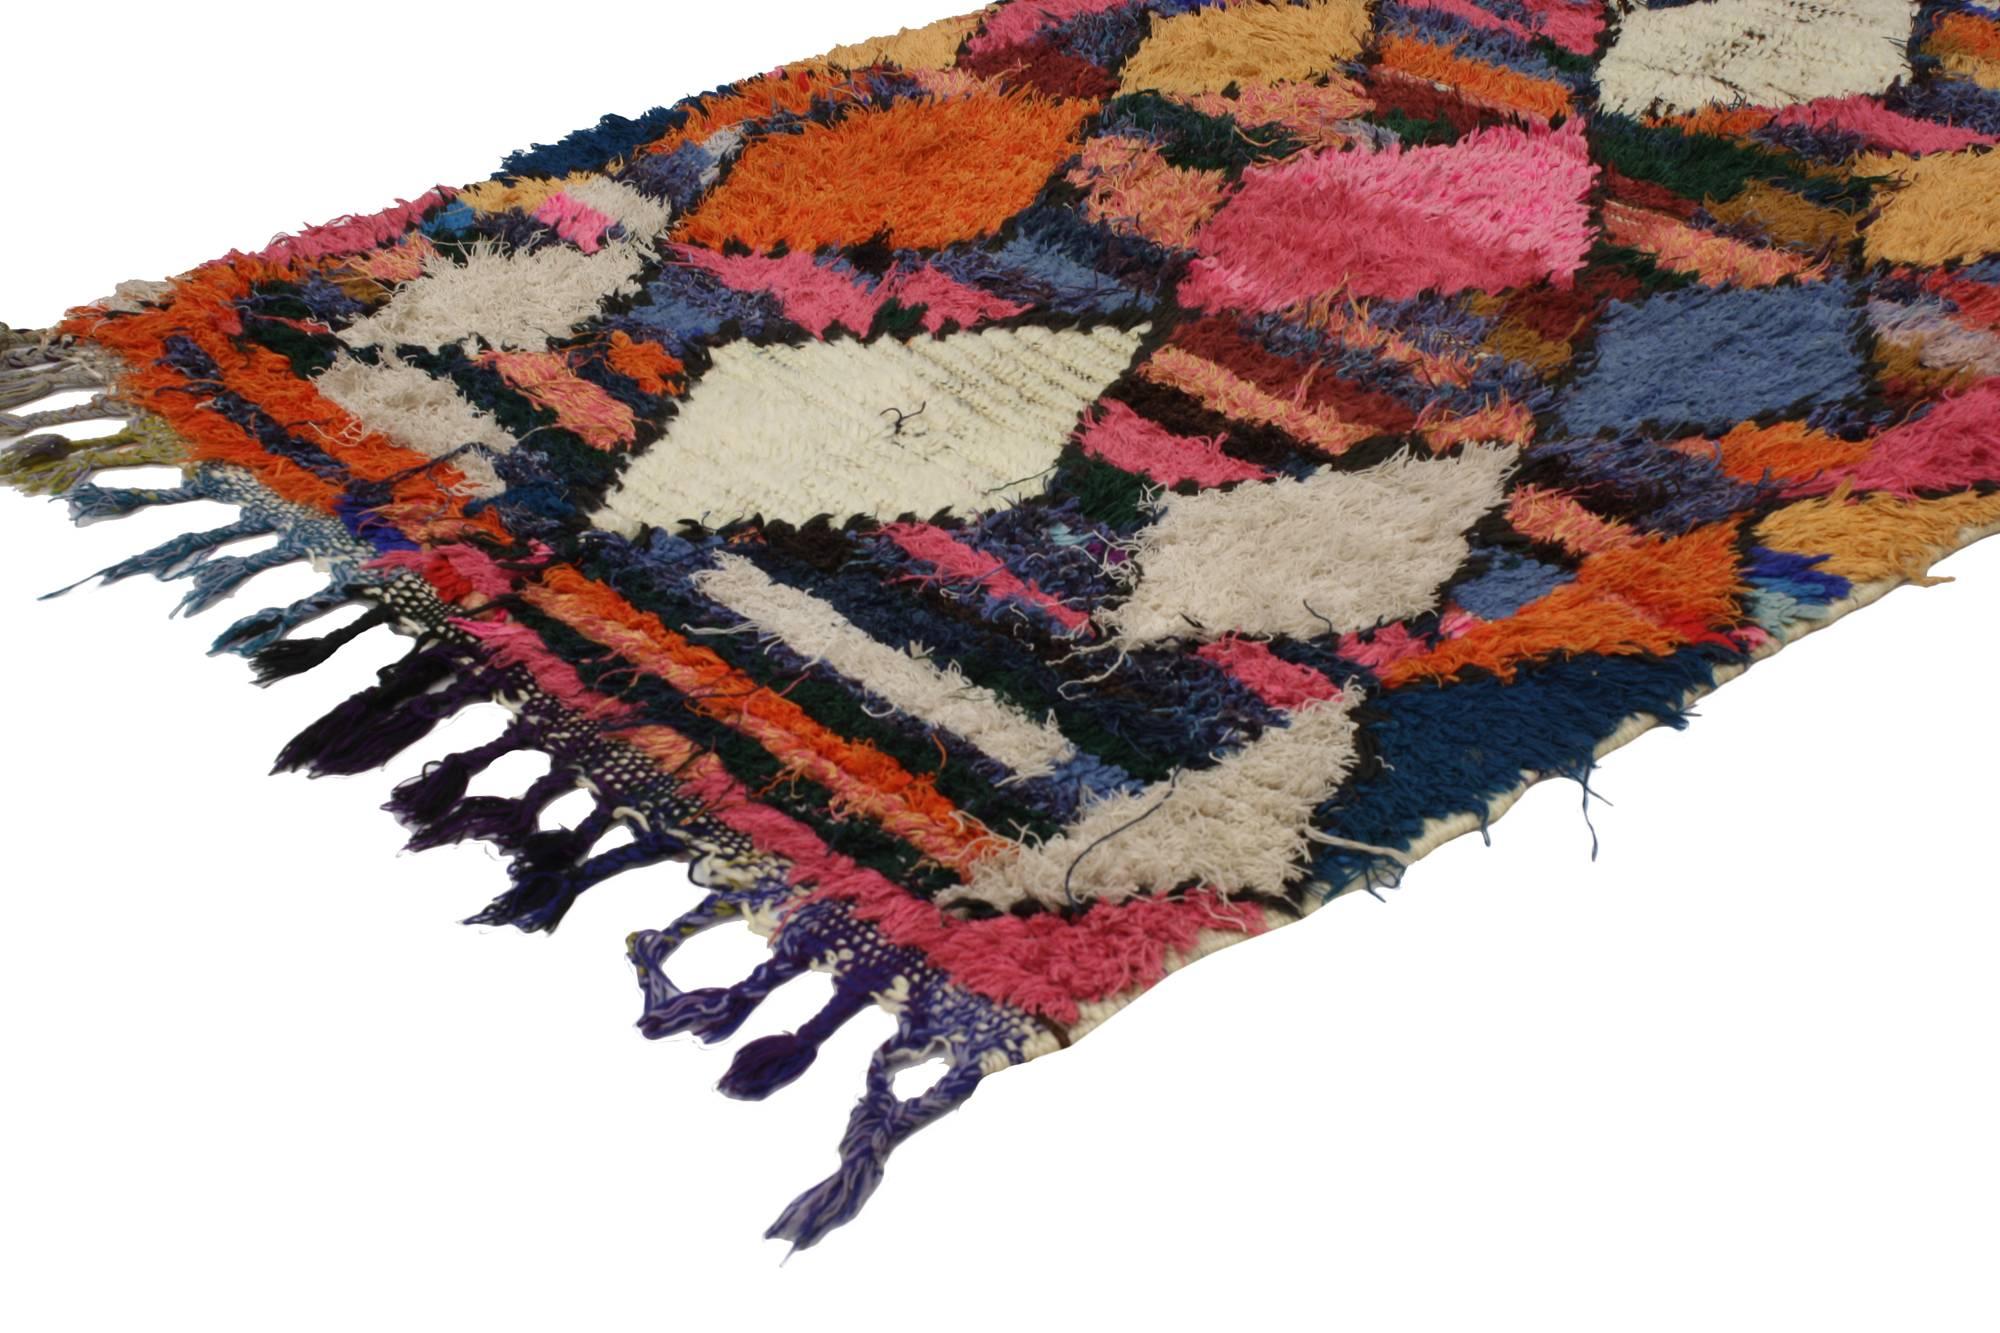 Tribal Vintage Berber Moroccan Boucherouite Rug, Colorful Moroccan Shag Accent Rug